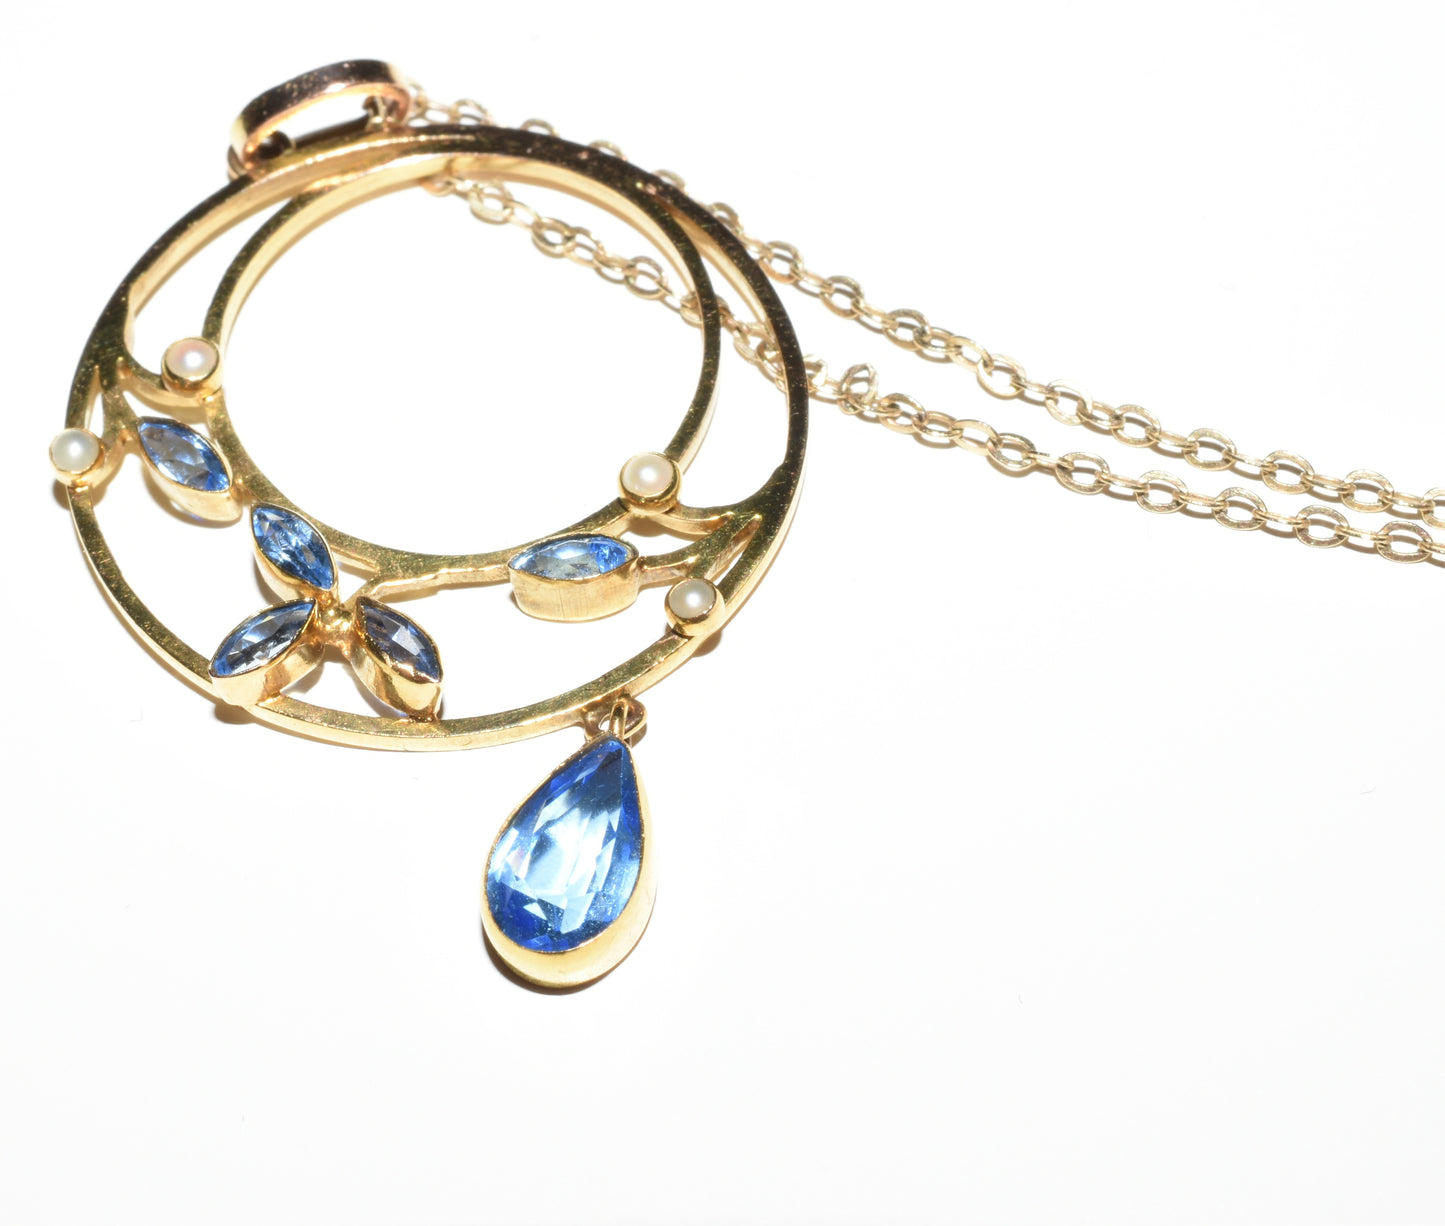 Antique 9ct Gold Blue Gemstone & Seed Pearl Ladies Necklace